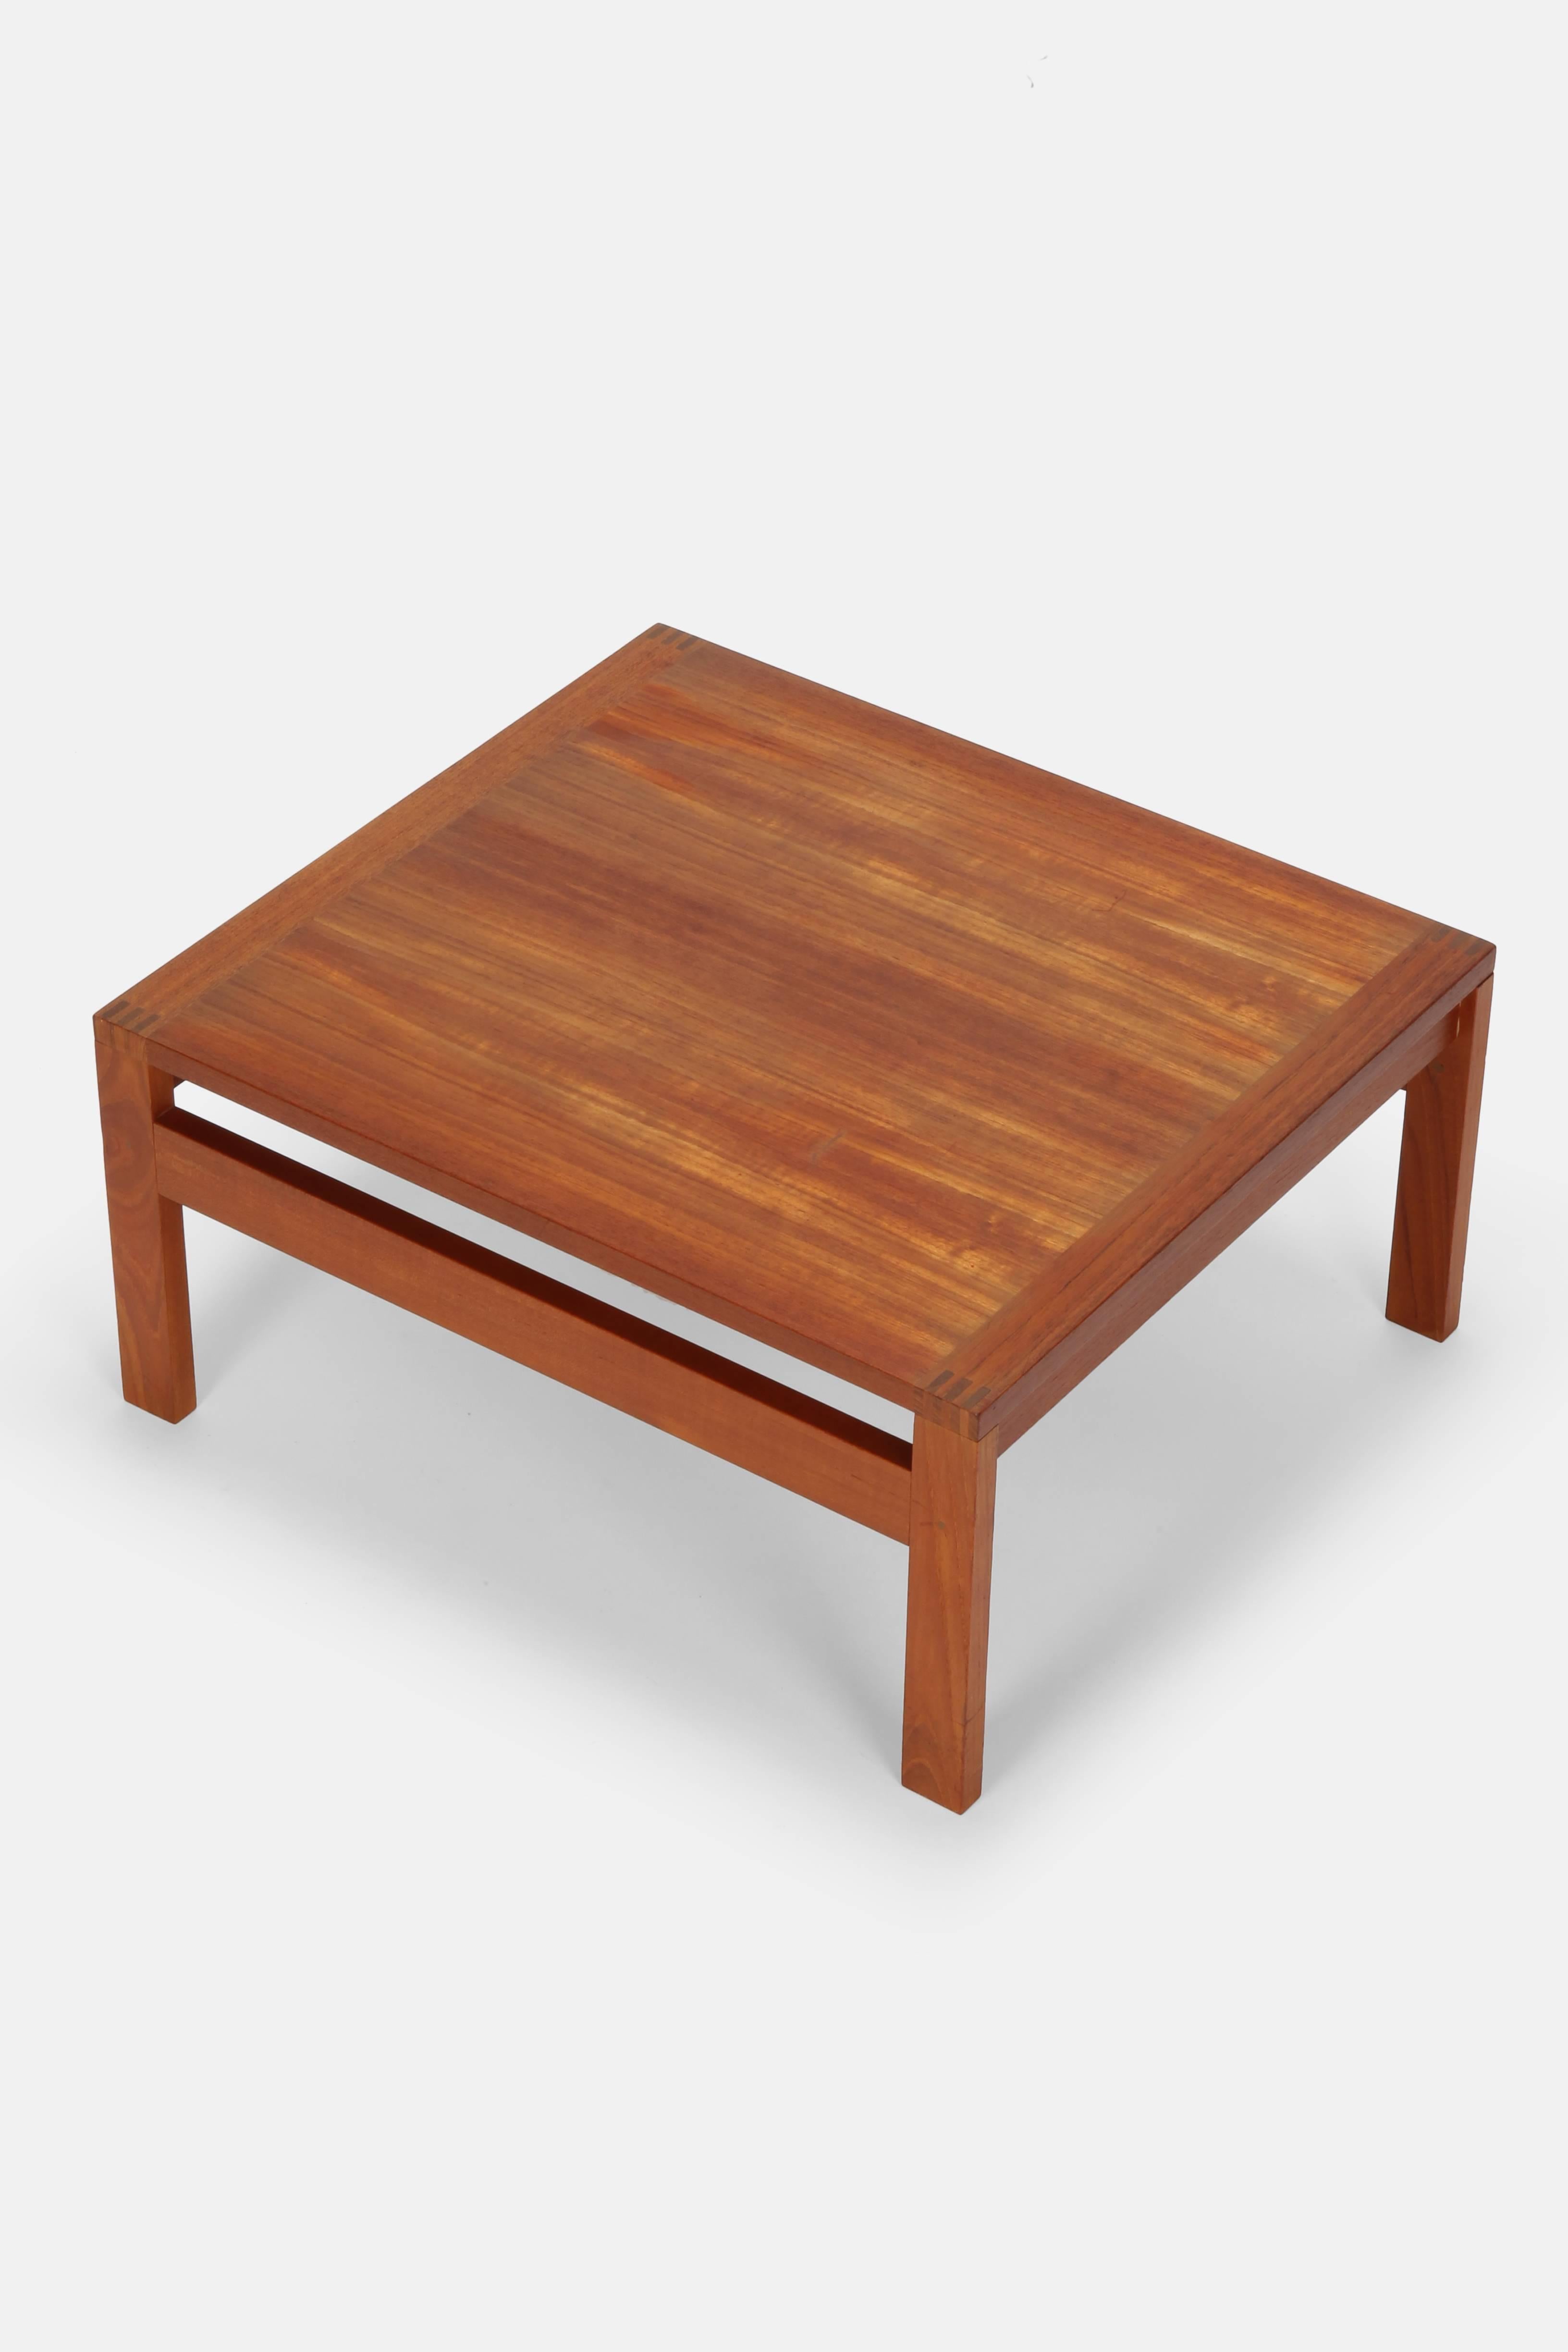 Ole Gjerlov-Knudsen coffee table manufactured by France & Son in the 1960s in Denmark. Solid teak wood shaped in to nice, clear lines with exposed wood joints. Badge from manufacturer on the bottom.